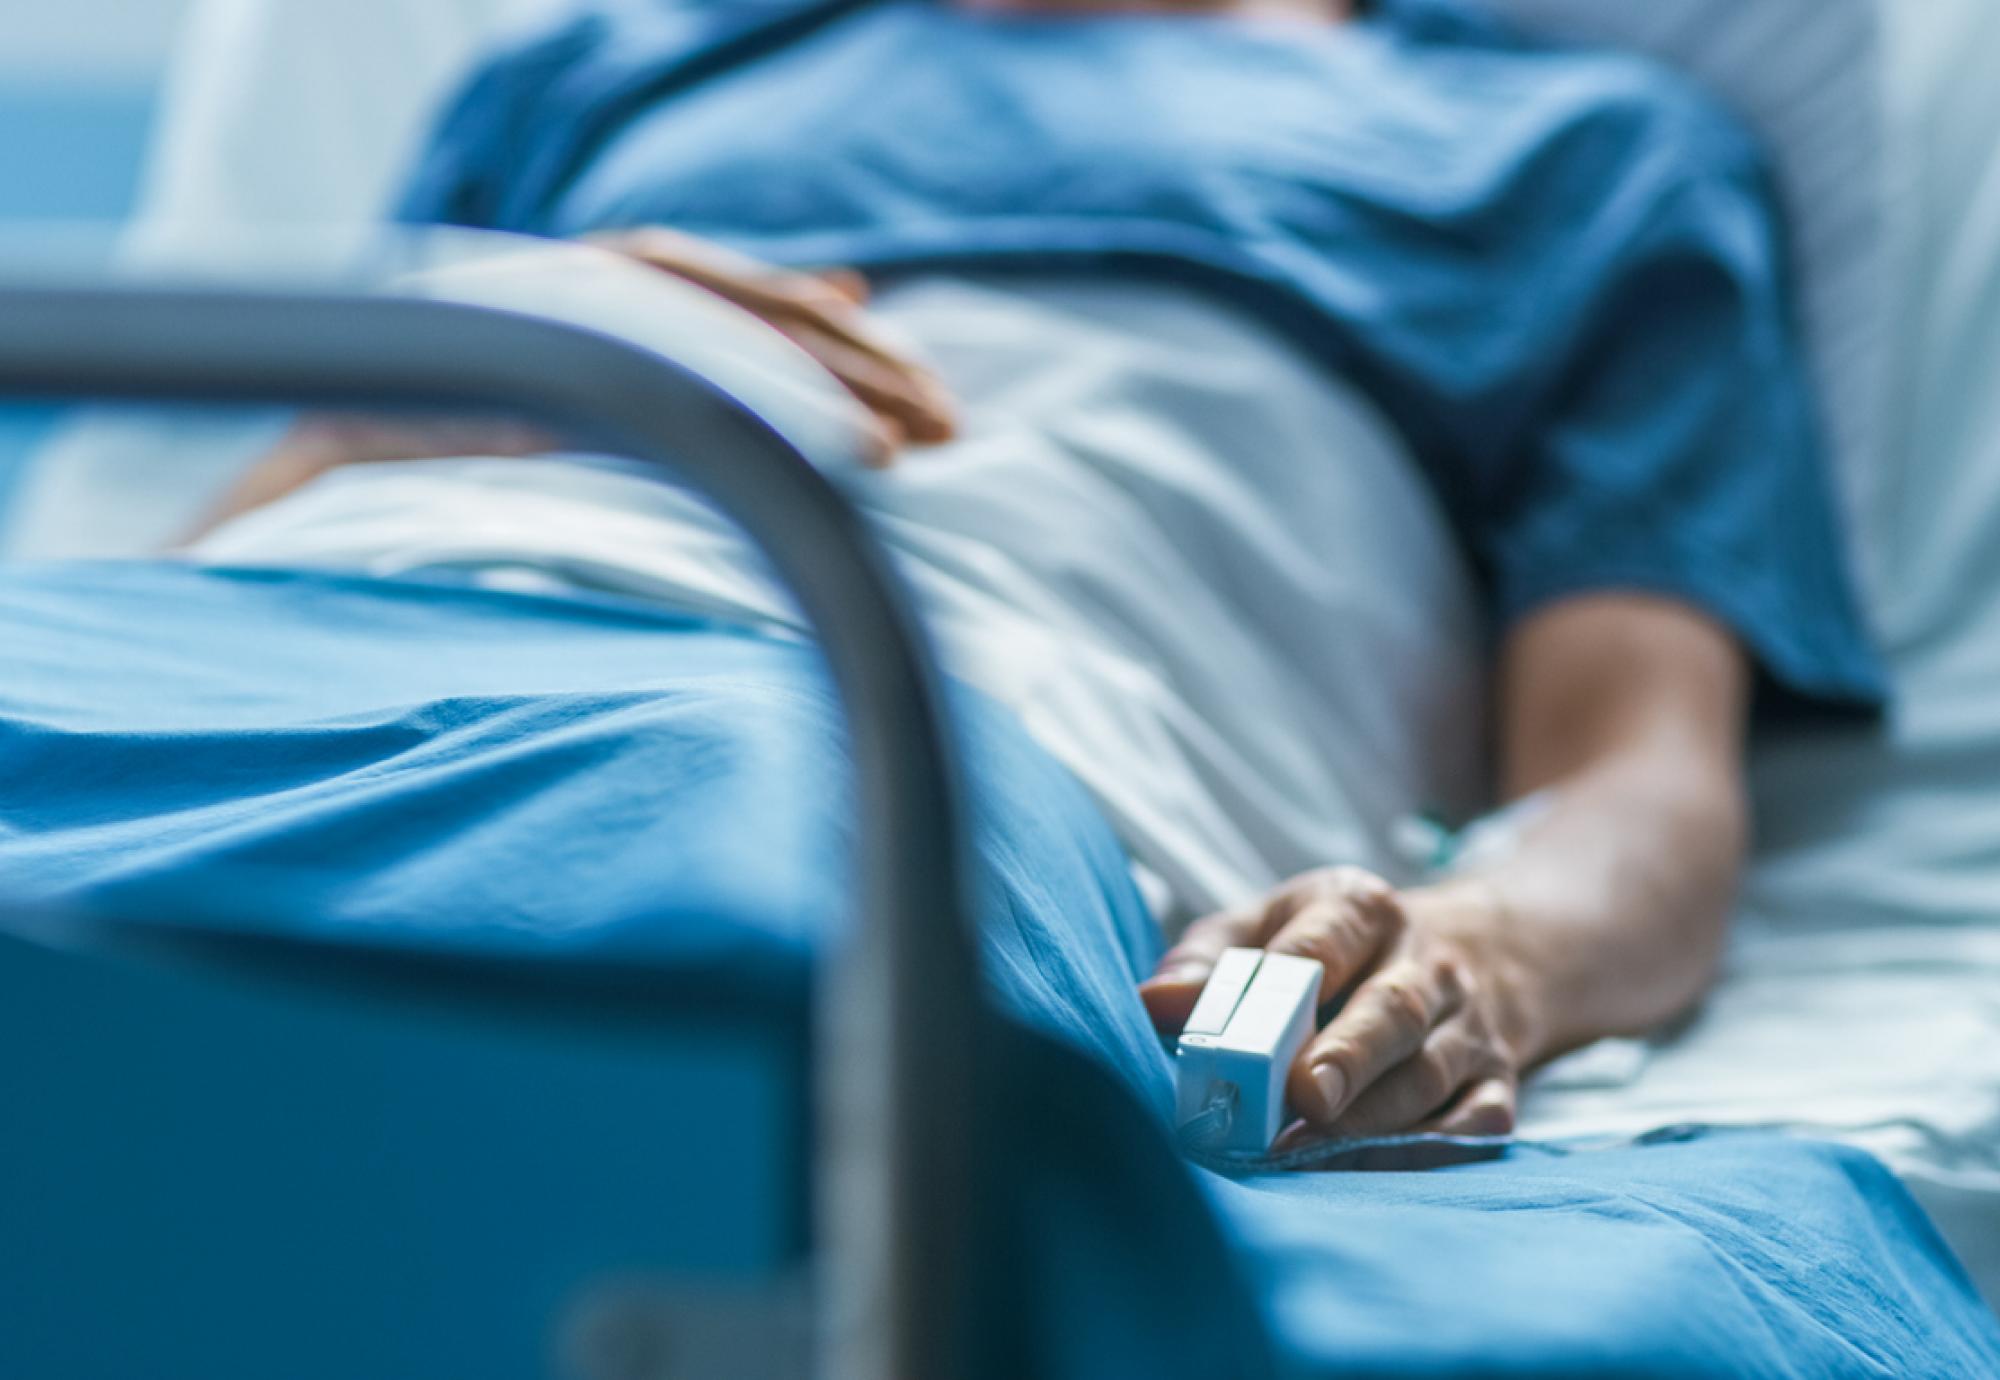 Image of a patient in a hospital bed depicting NHS cancer diagnostics